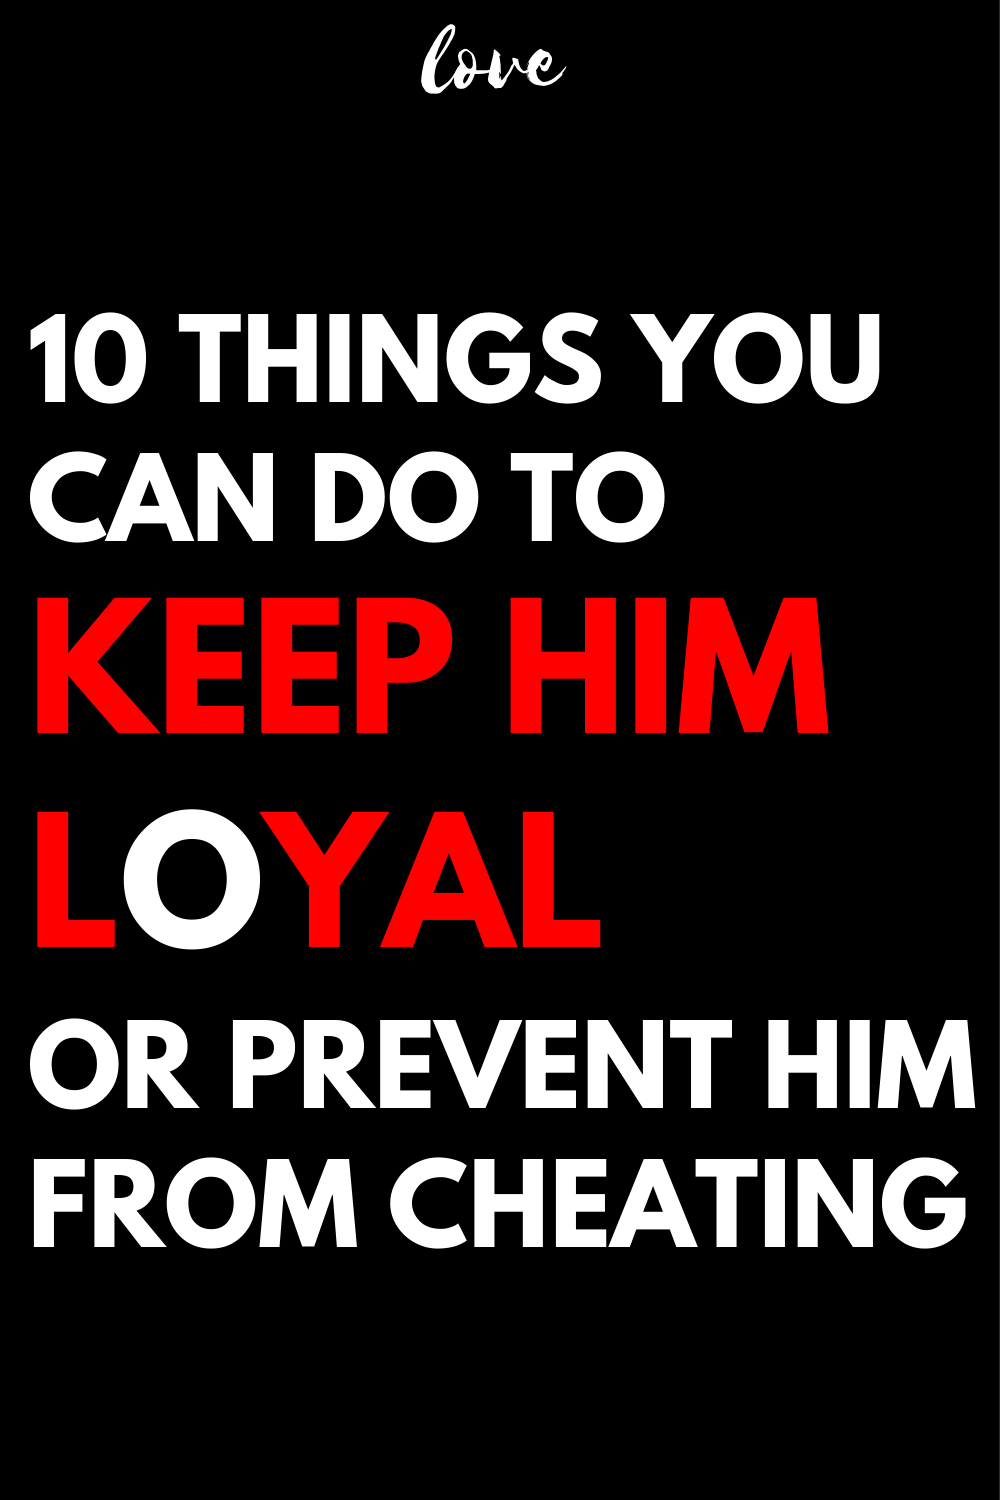 10 things you can do to keep him loyal or prevent him from cheating on you again